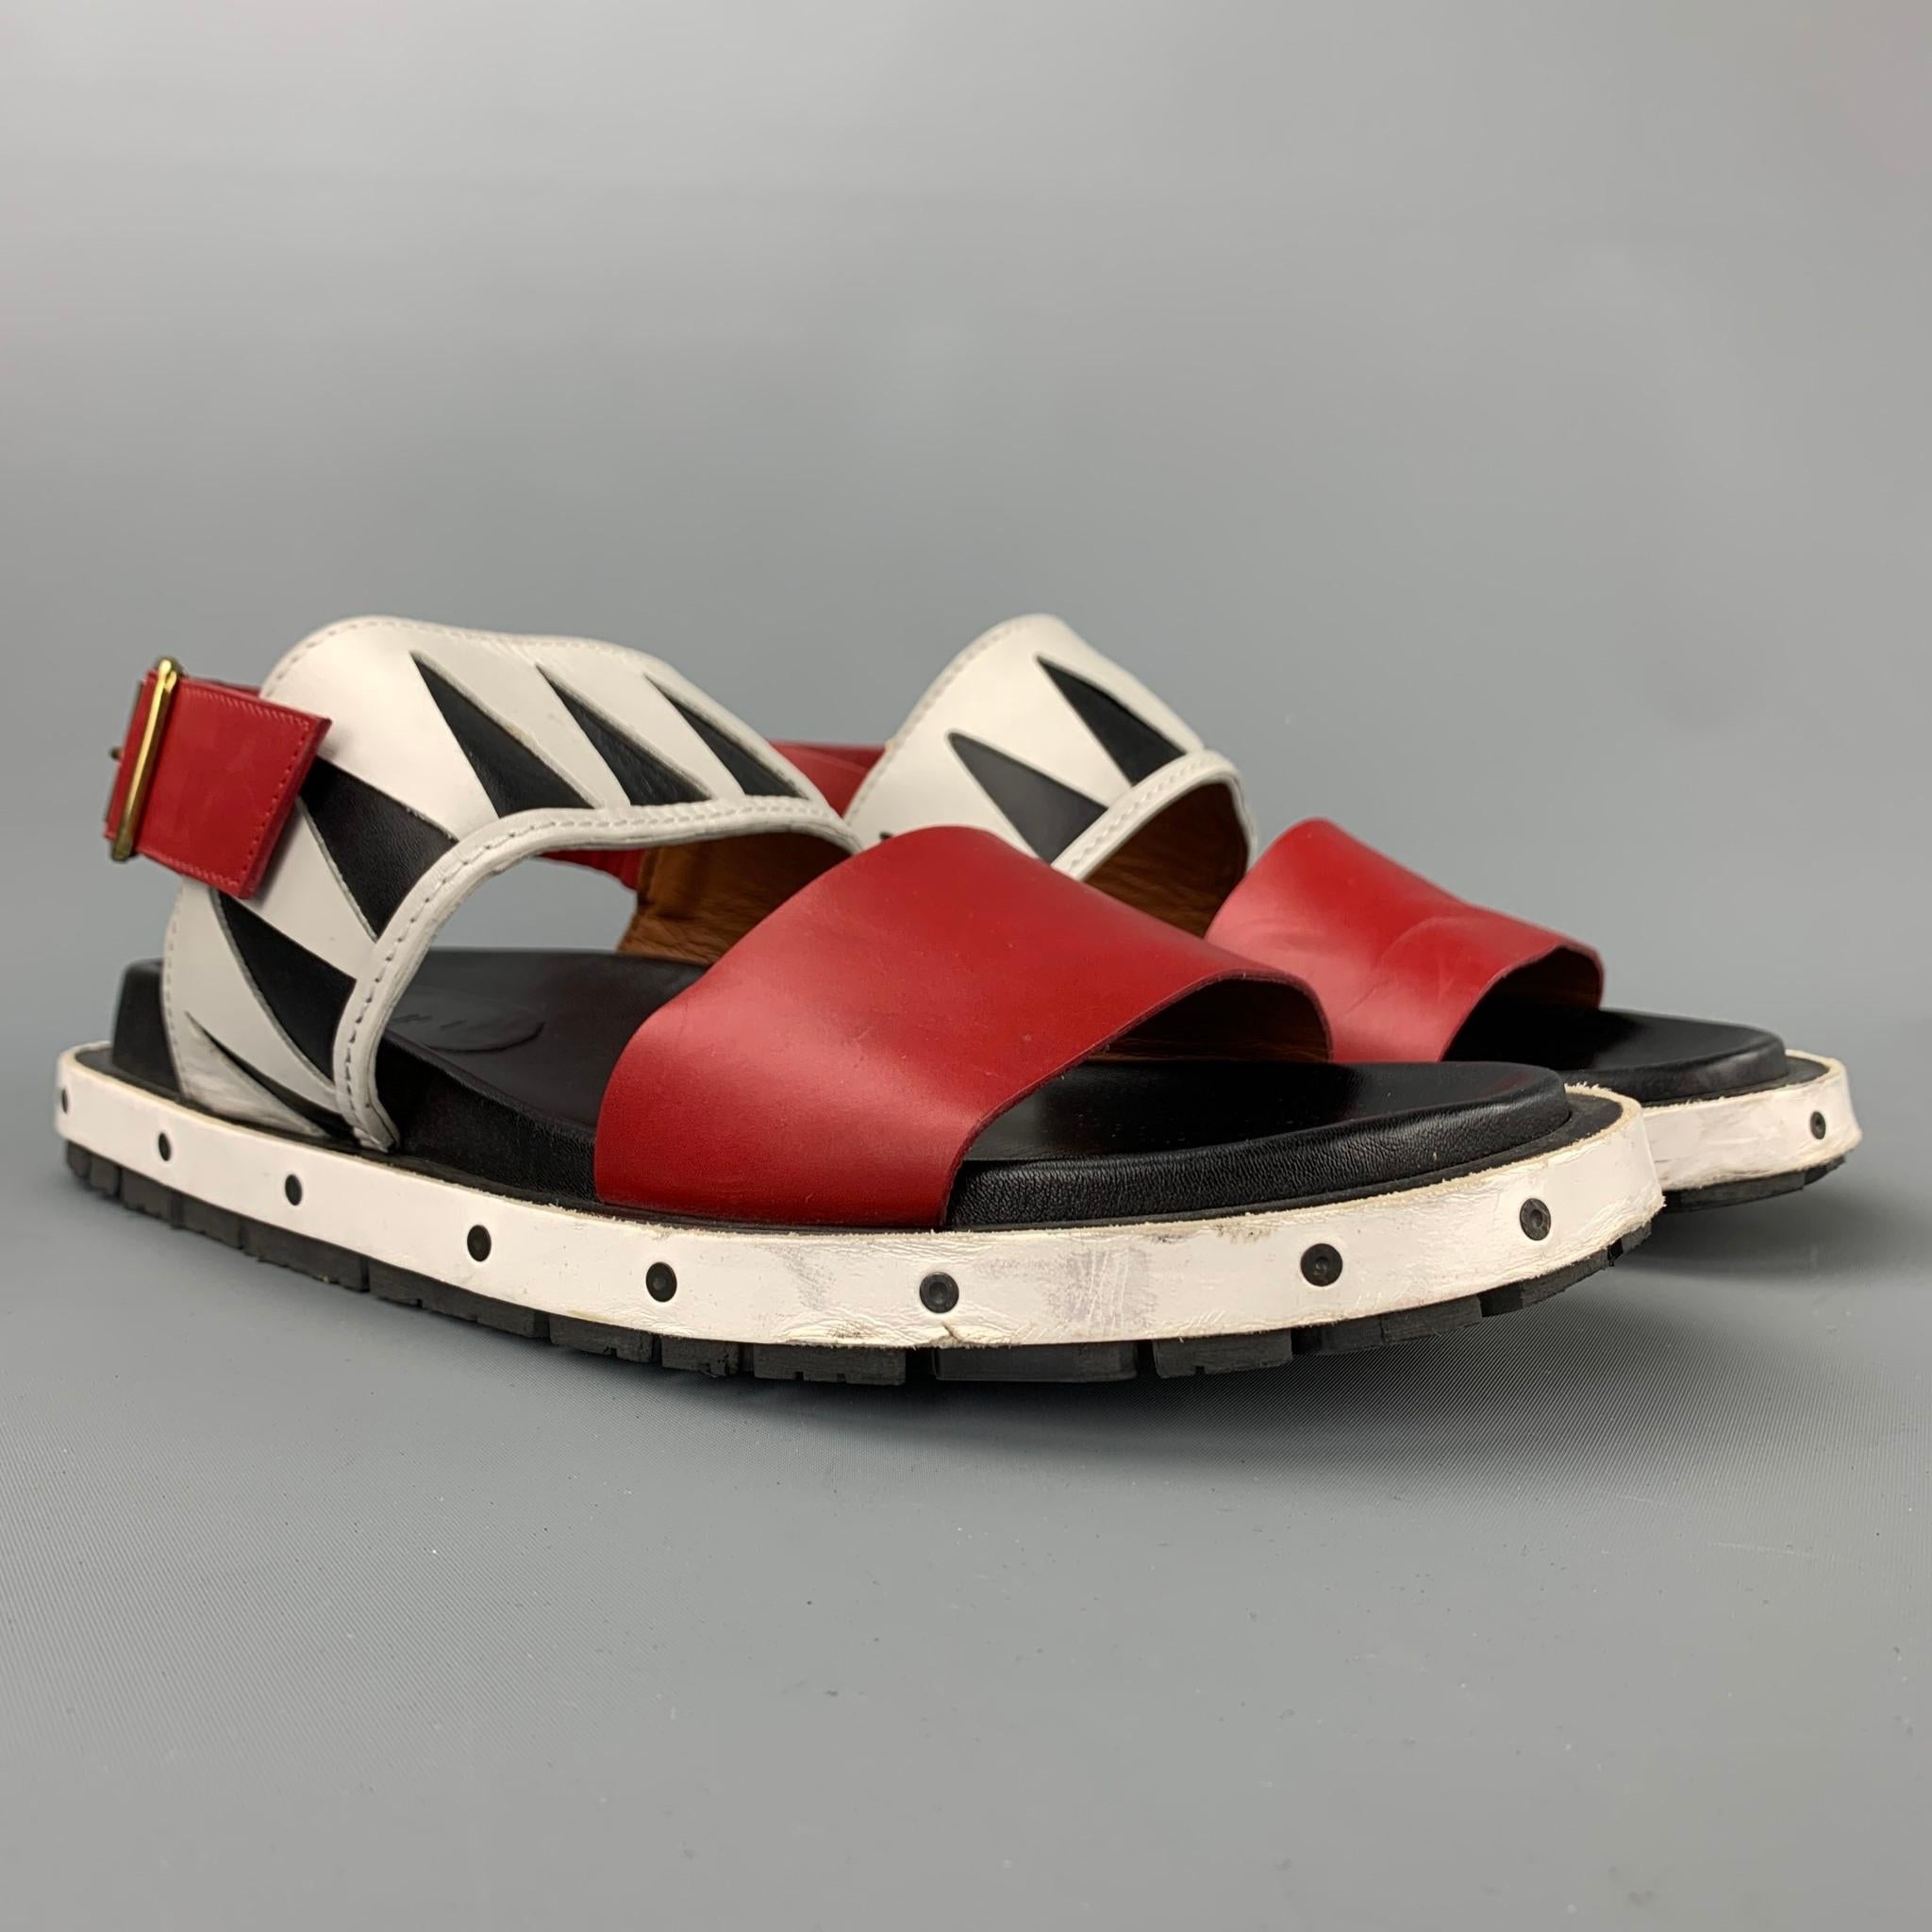 MARNI sandals comes in a red & white leather with a black trim featuring a belted strap closure and a rubber sole. Moderate wear. Made in Italy.

Very Good Pre-Owned Condition.
Marked: EU 43

Outsole: 12 in. x 5 in.